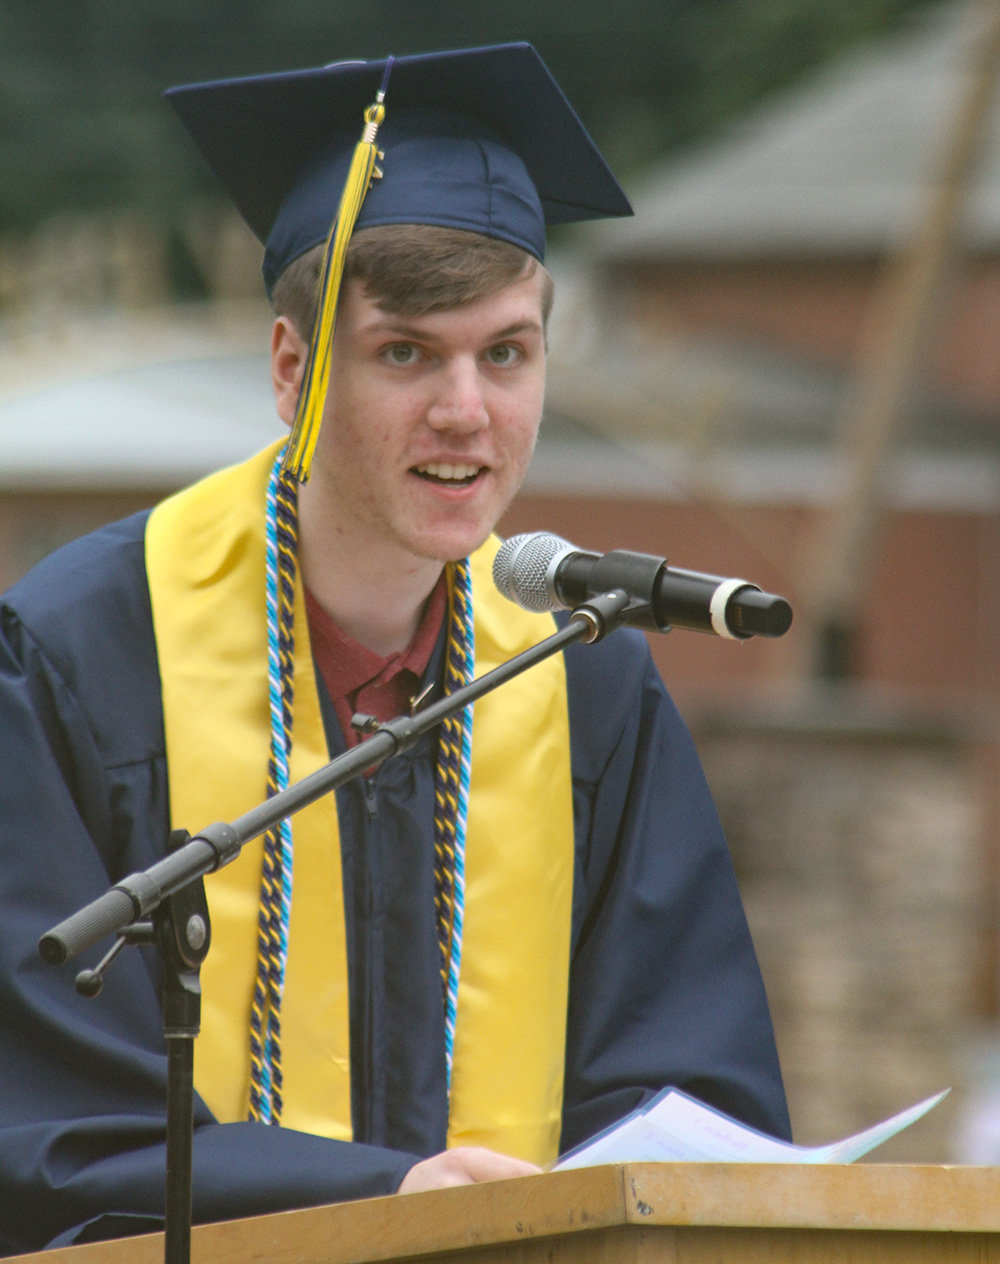 Salutatorian Nathan Teall told his fellow graduates it’s ok to be uncertain about the future.